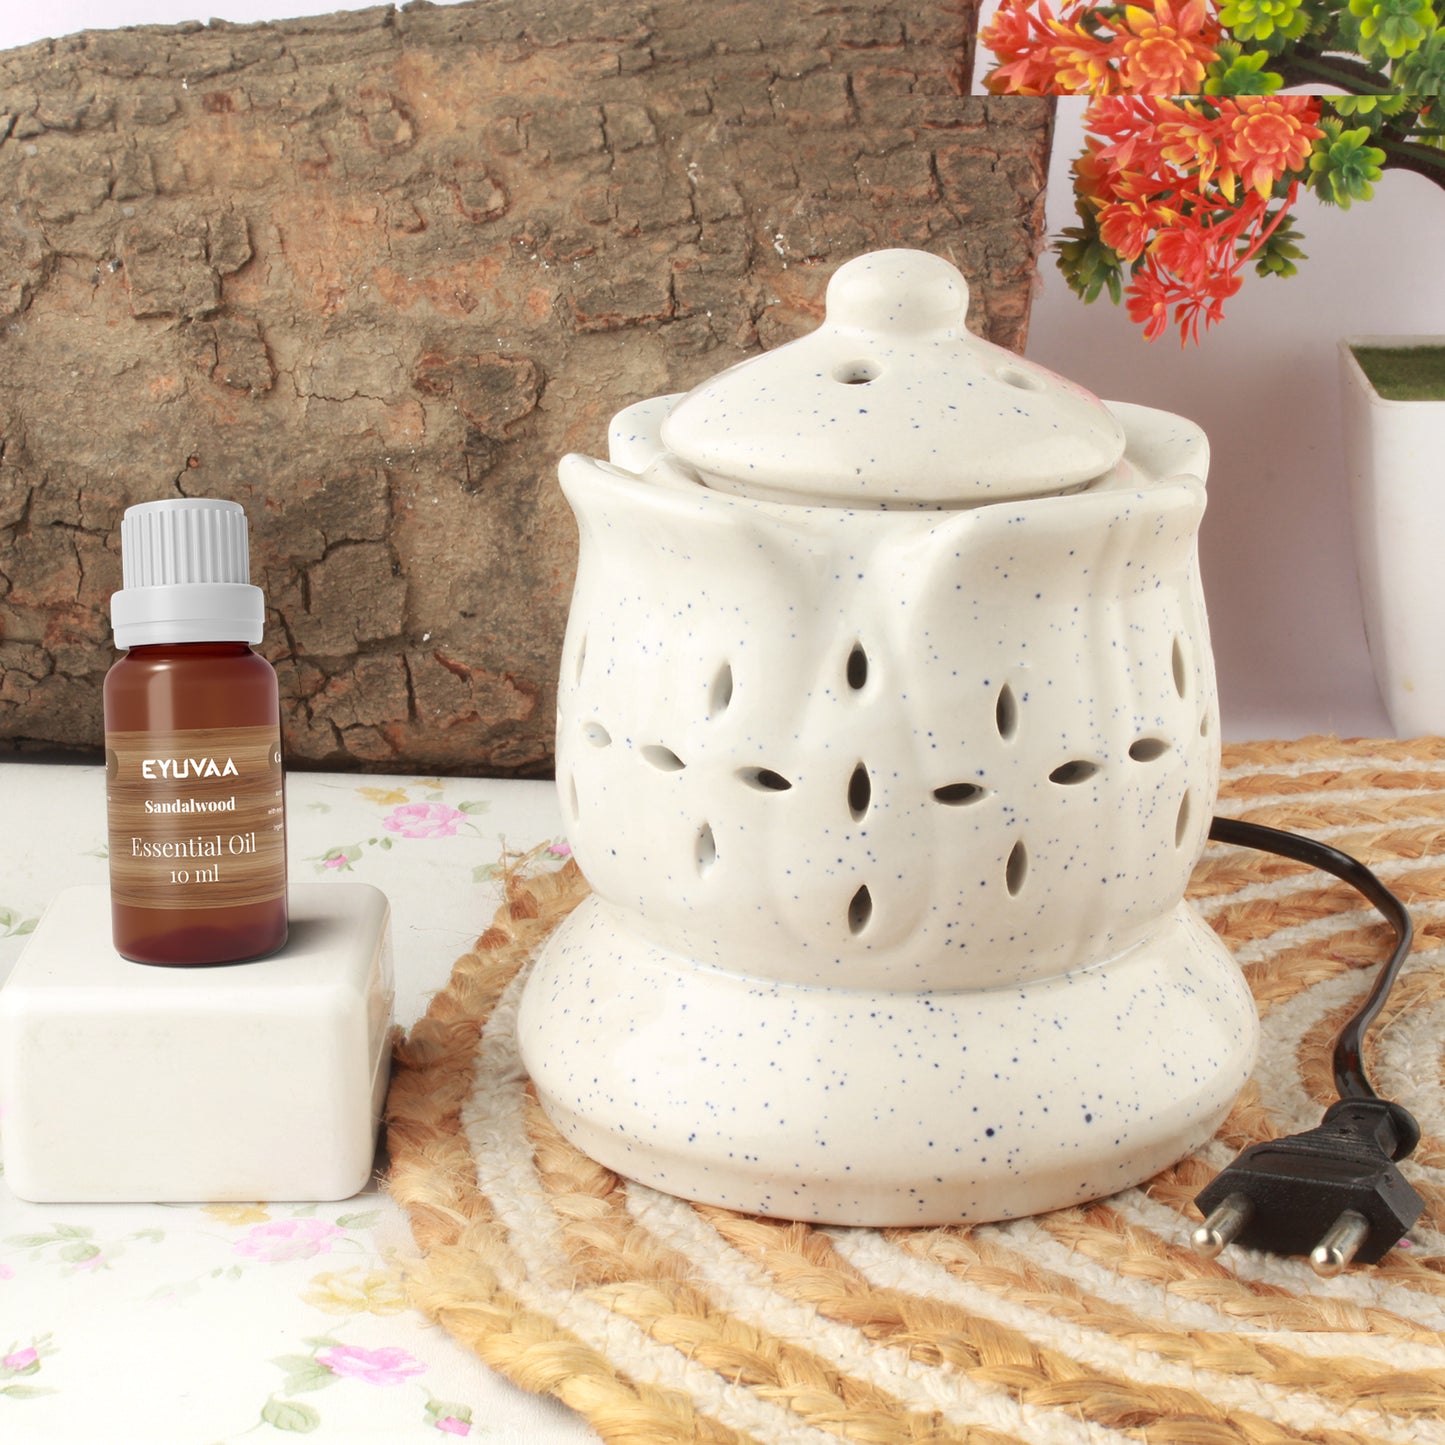 Kamal-shaped Aroma Electric Diffuser, Lotus shaped Diffuser,Aromatherapy Ceramic Diffuser Set for Home Fragrance with 10 ml Aroma Oil